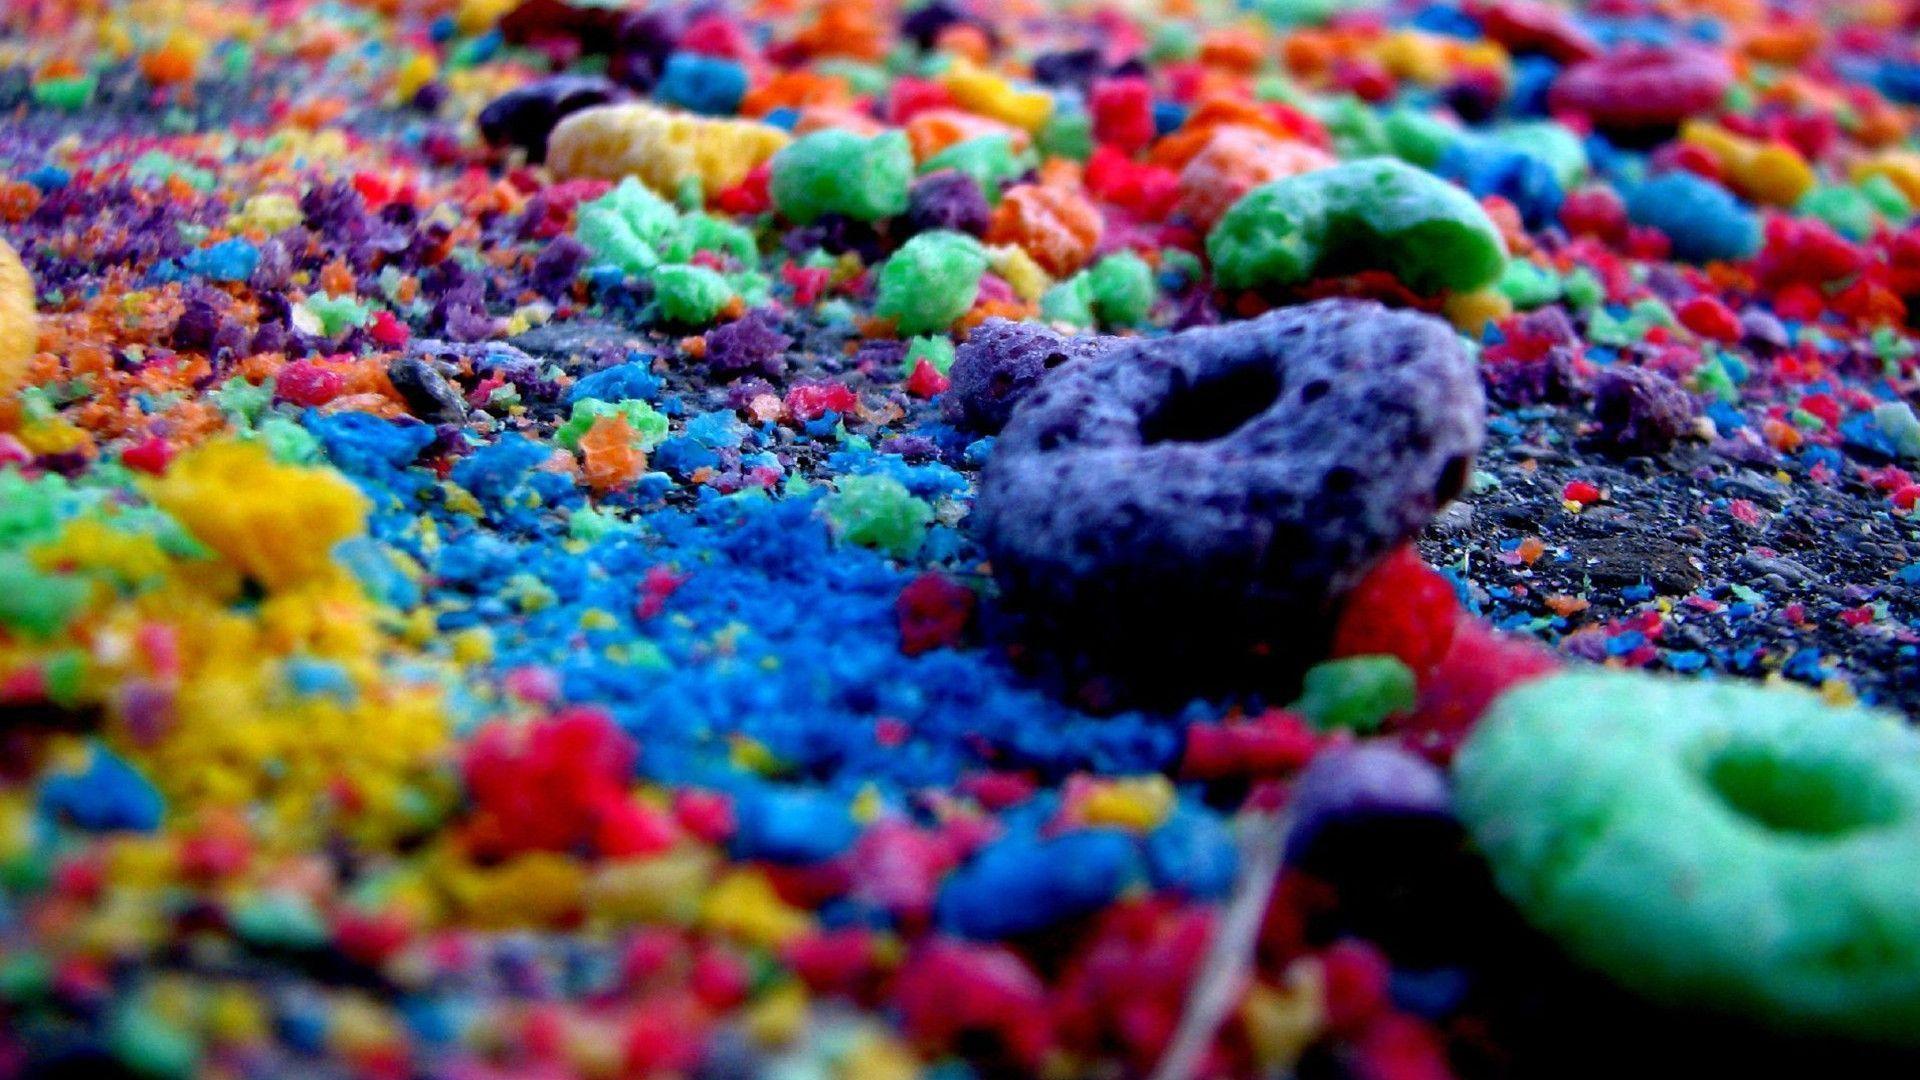 Colorful cereal Wallpaper #